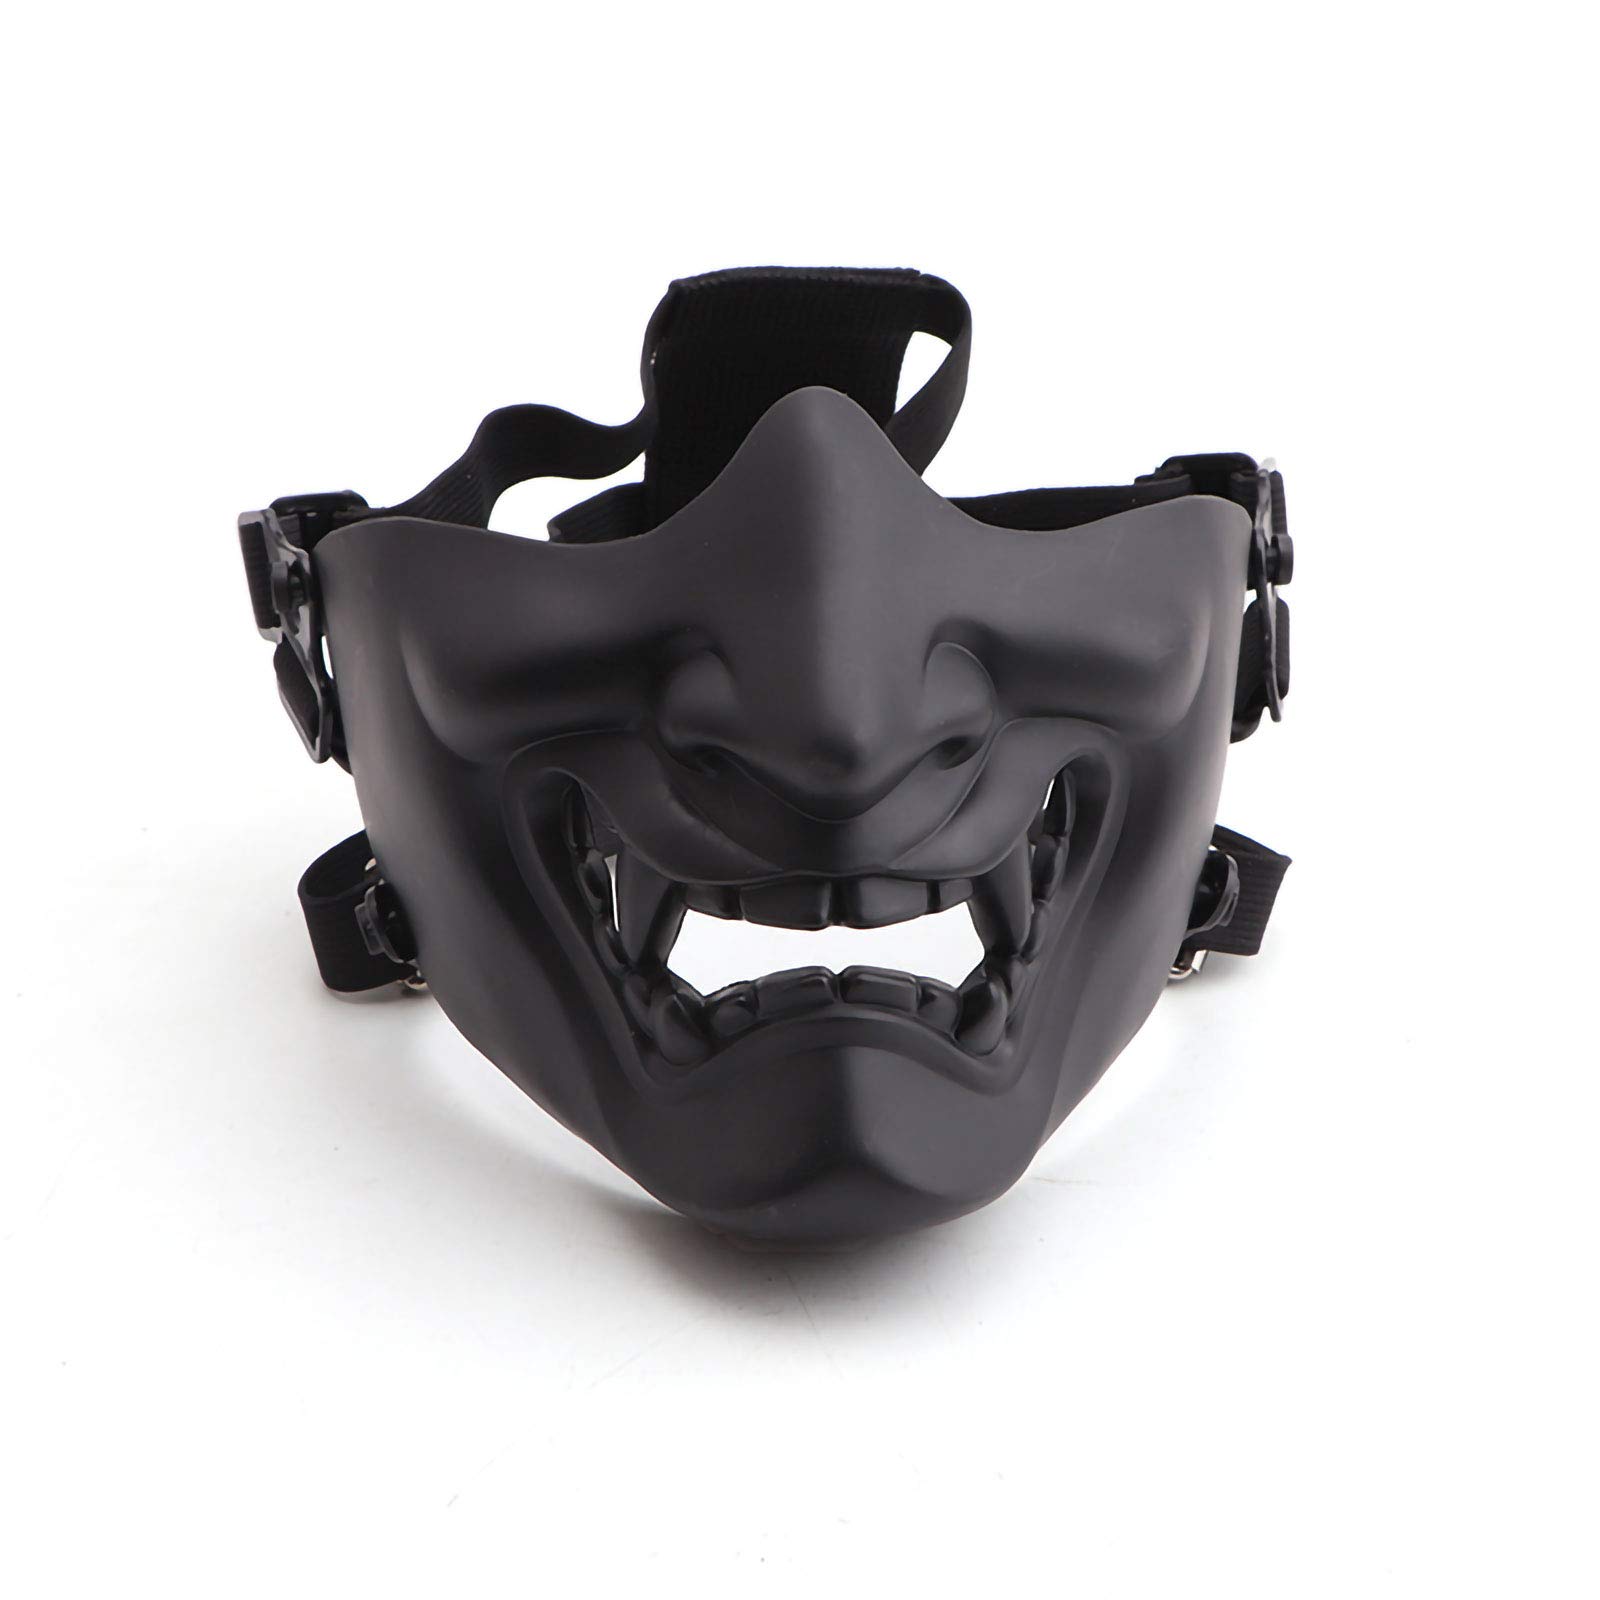 NINAT Airsoft Skull Mask Half Face Tactical Masks for Halloween Paintball CS Survival Game Shooting Cosplay Party Movie Scary Masks White Black Blue Yellow Golden